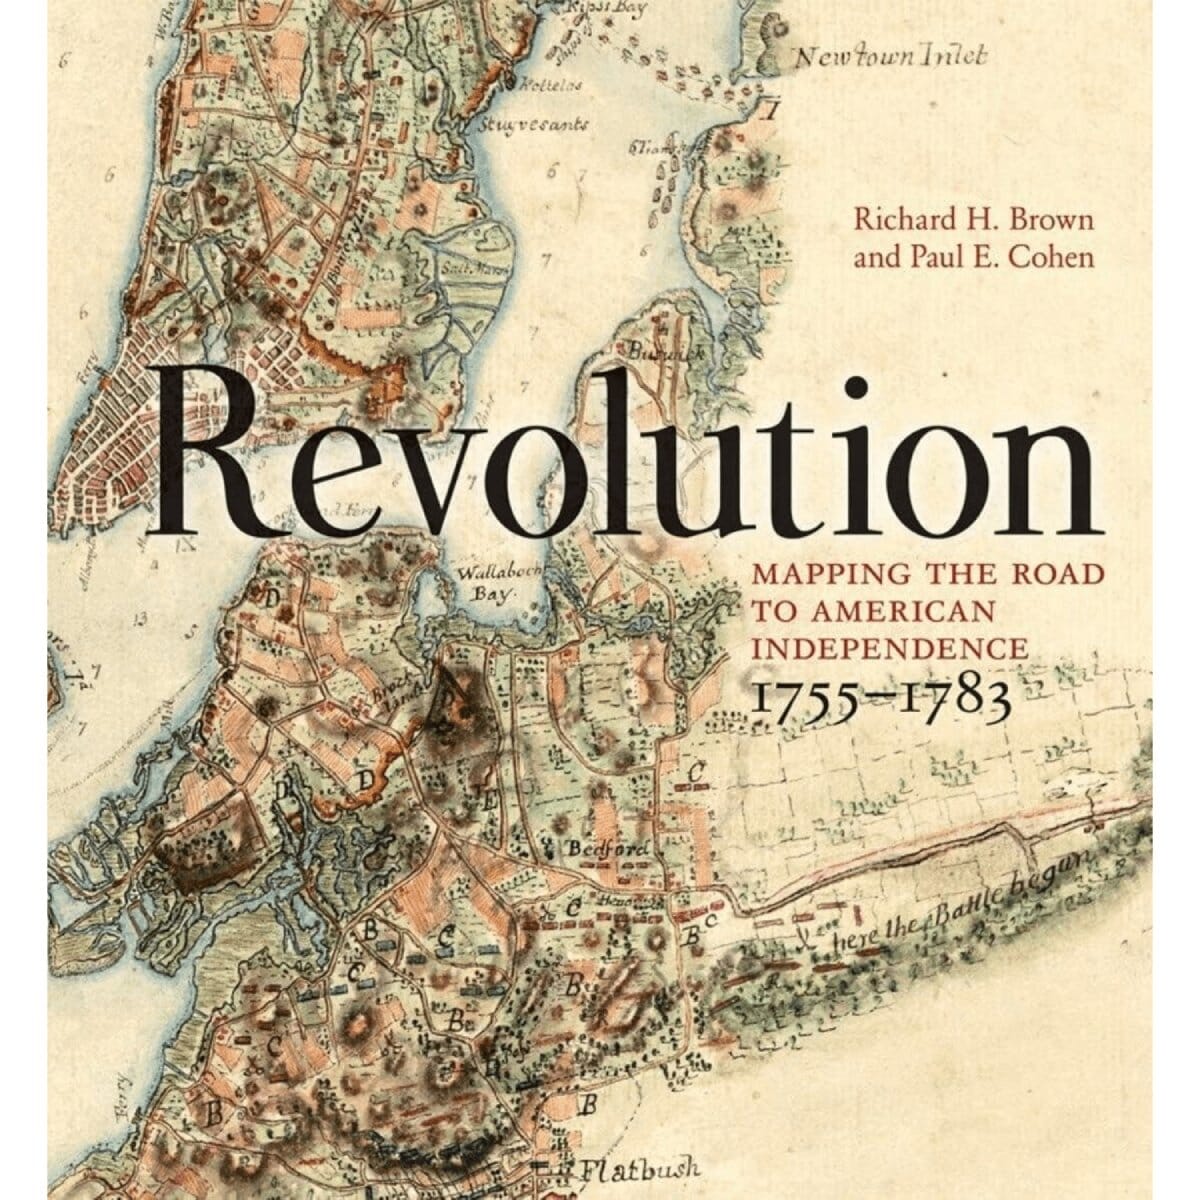 Revolution: Mapping the Road to Independence